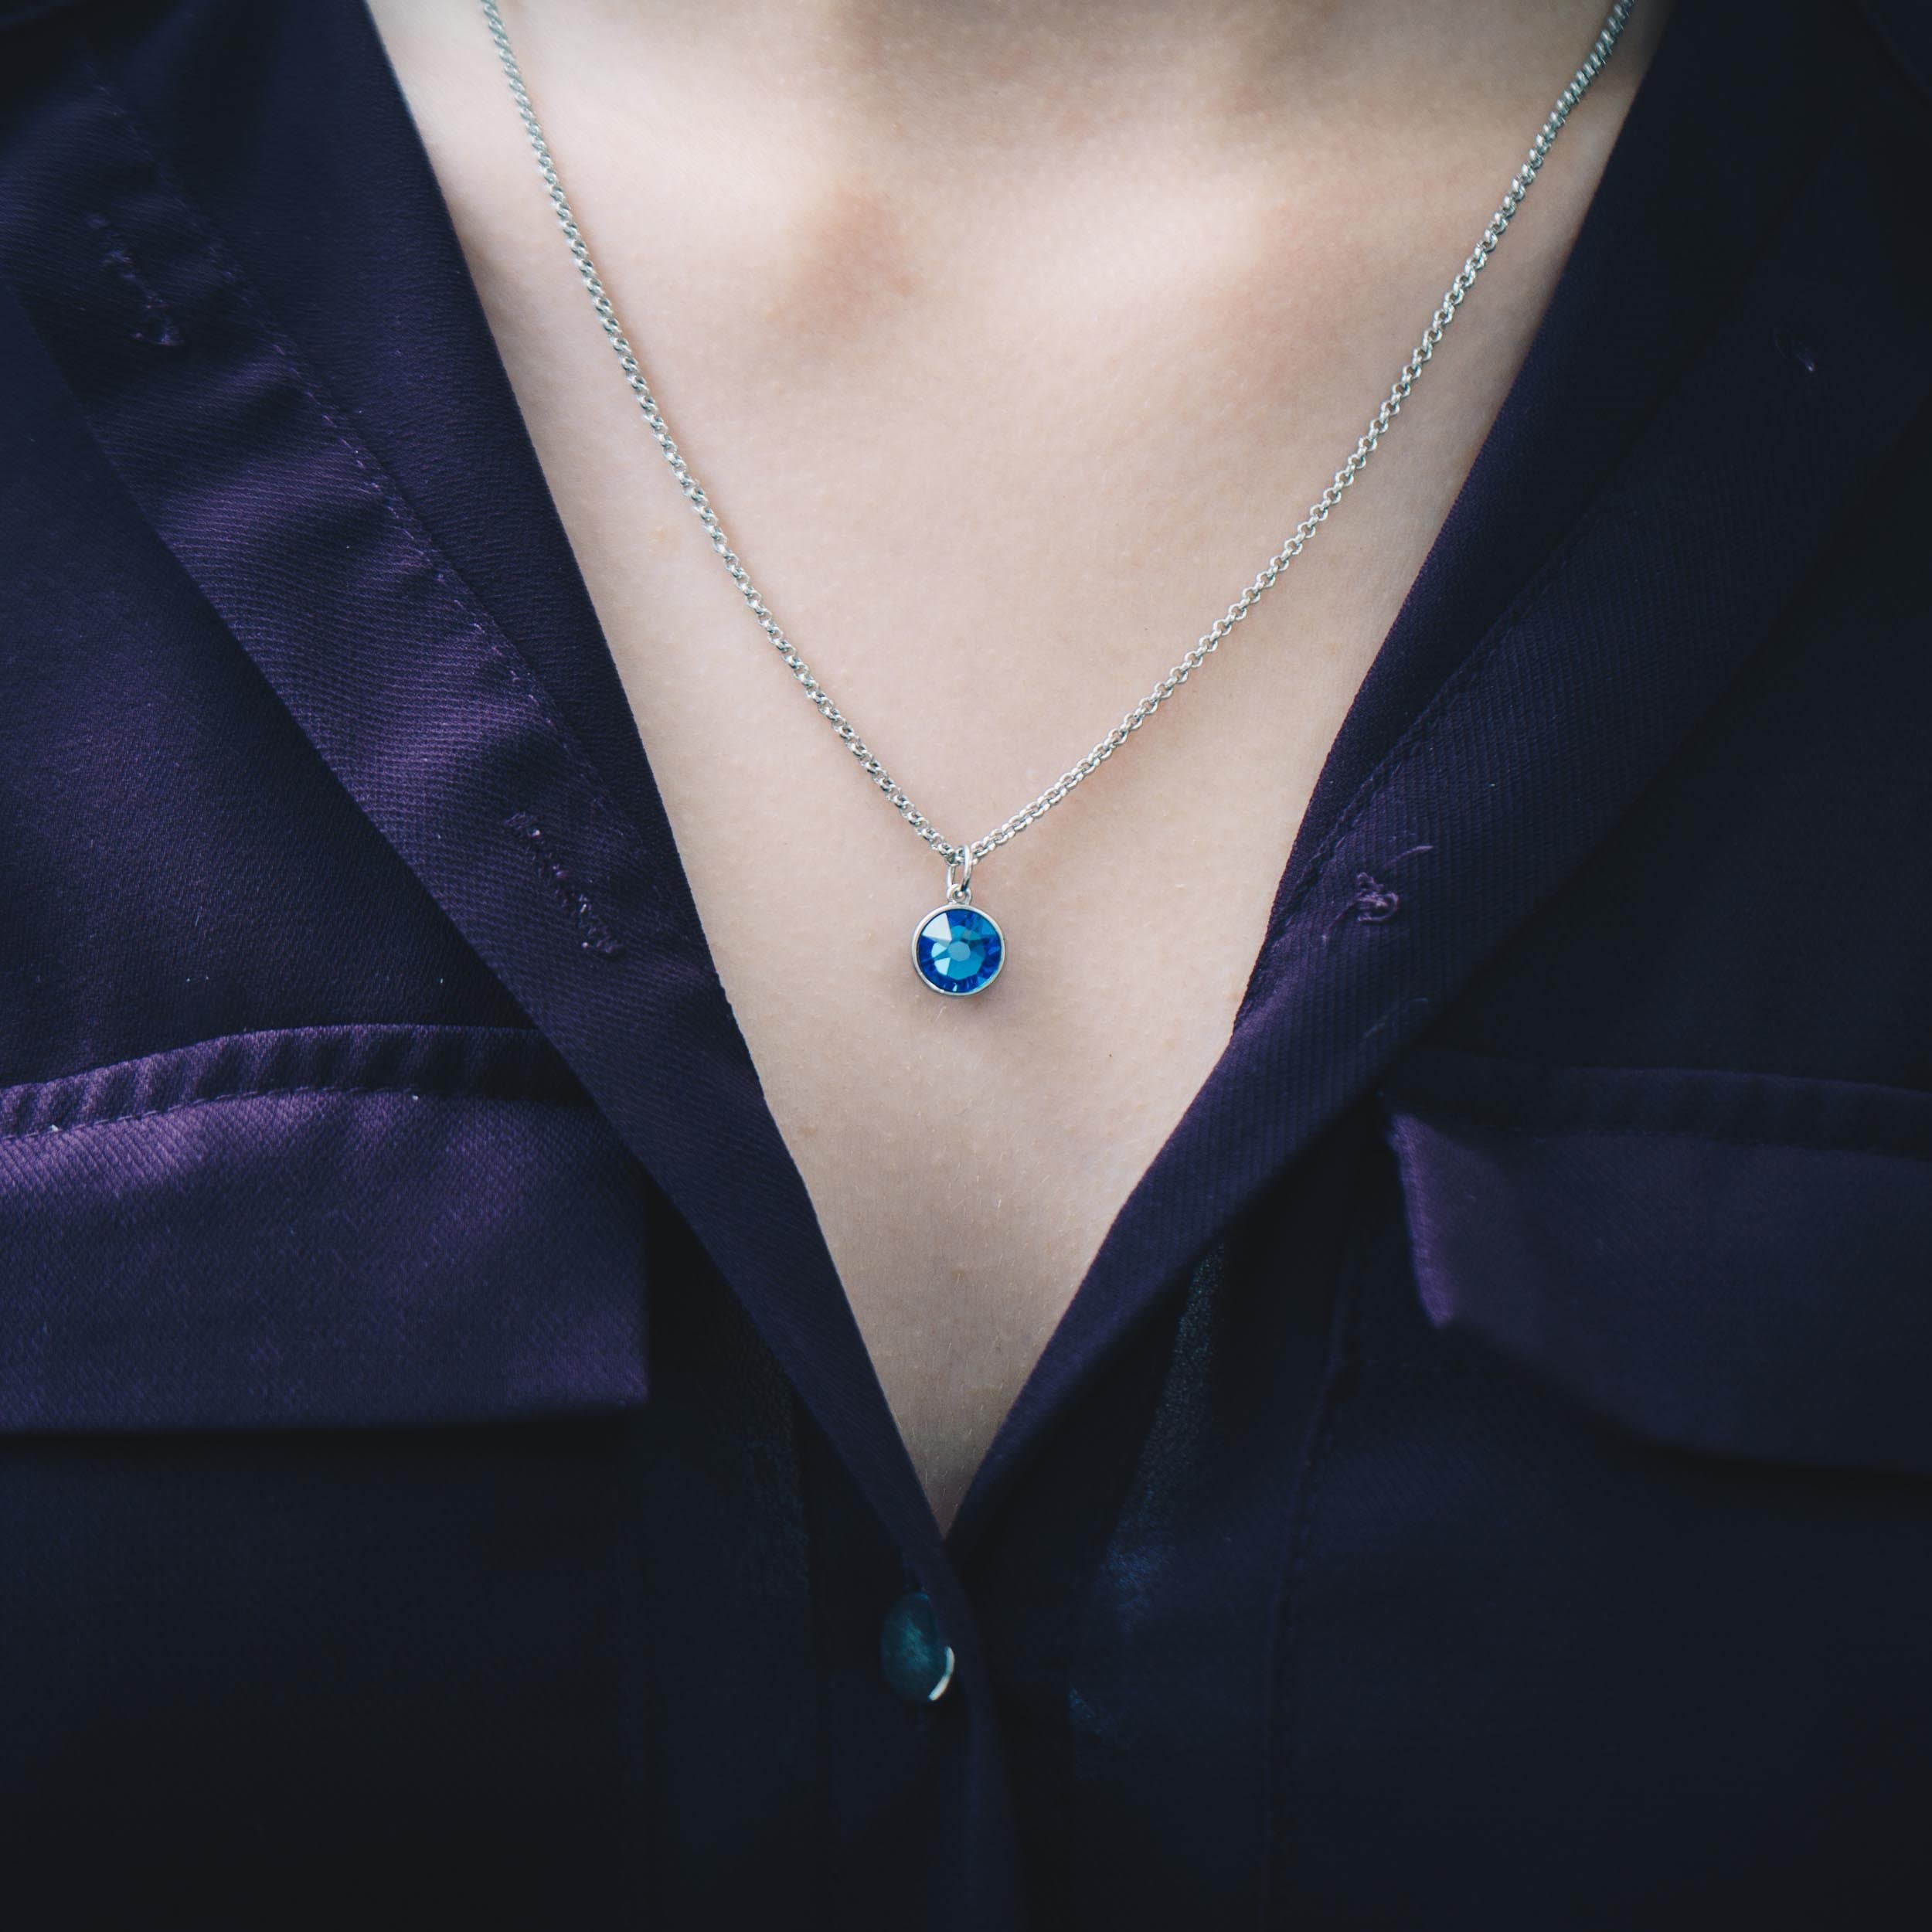 September (Sapphire) Birthstone Necklace Created with Zircondia® Crystals